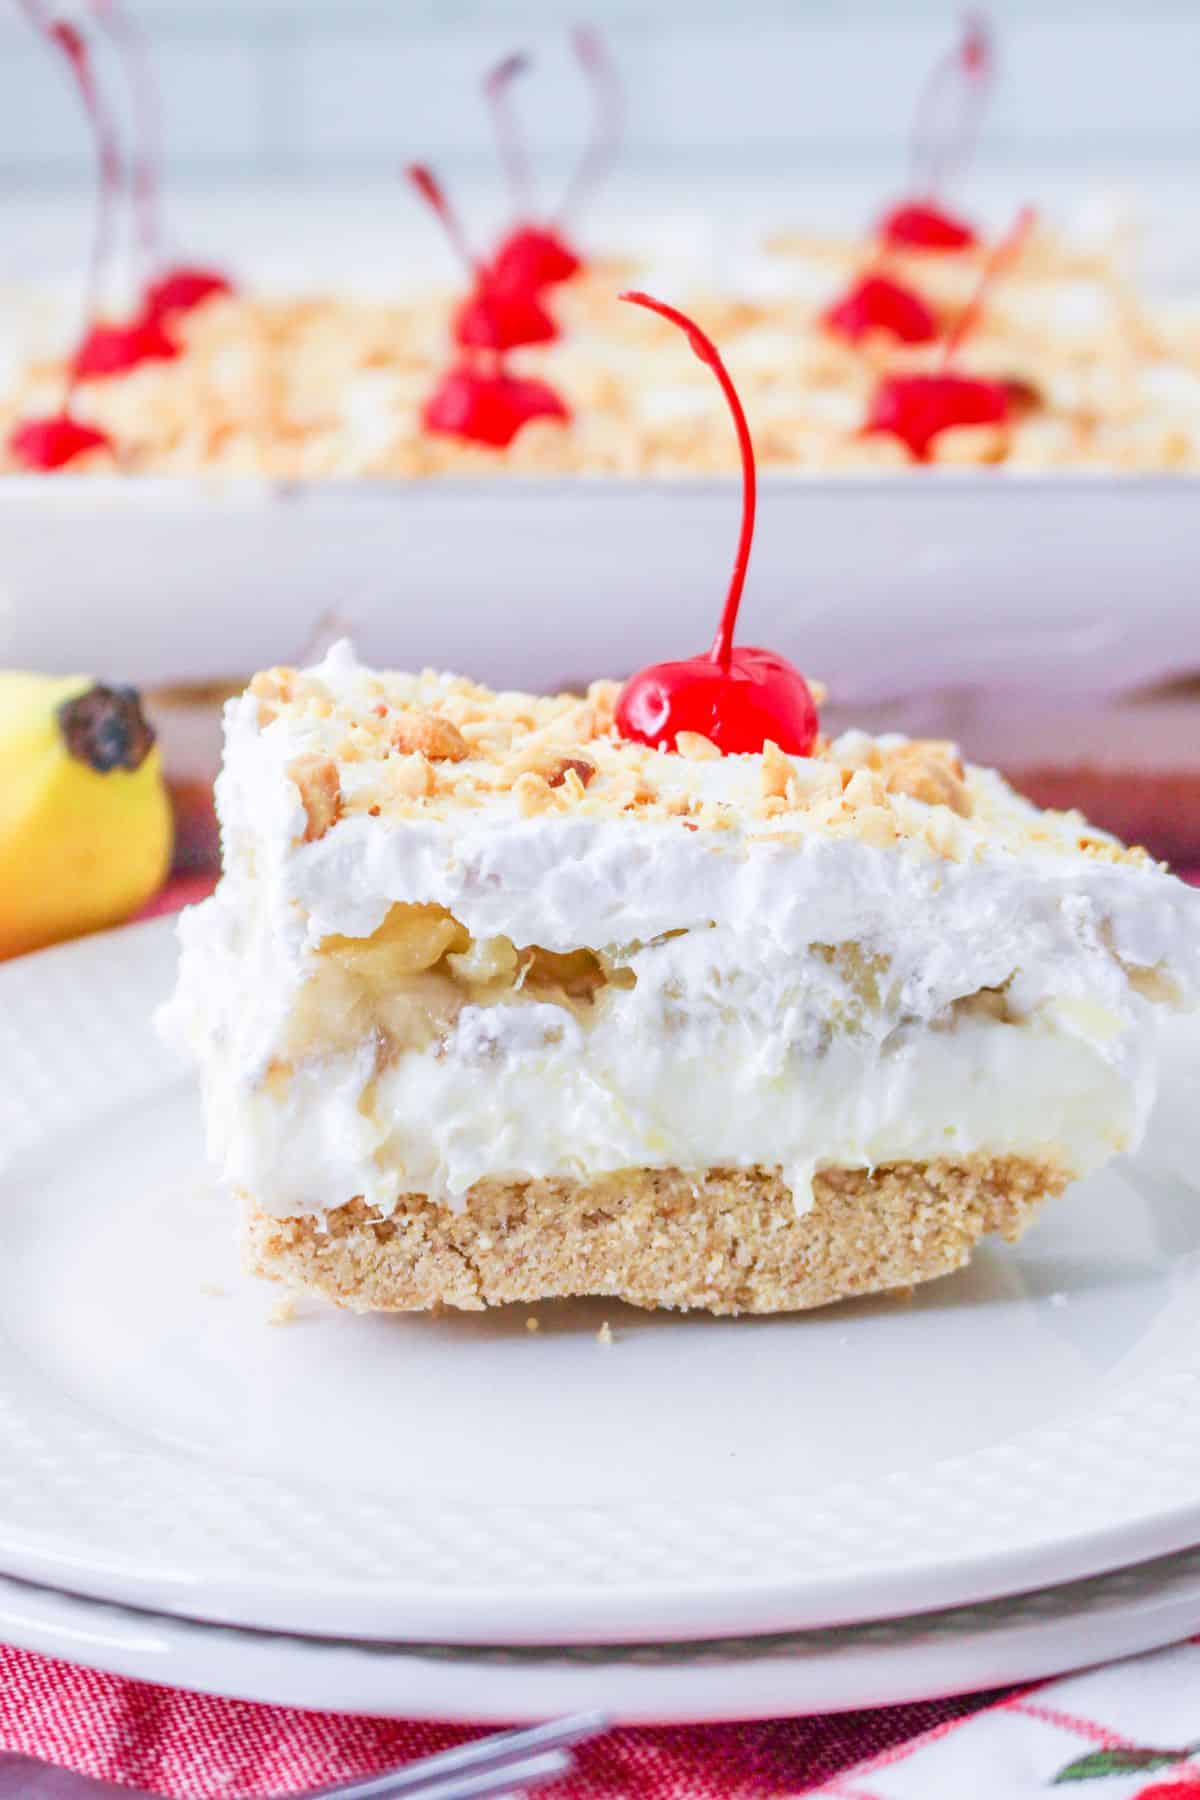 A square of banana split cake on a white plate.